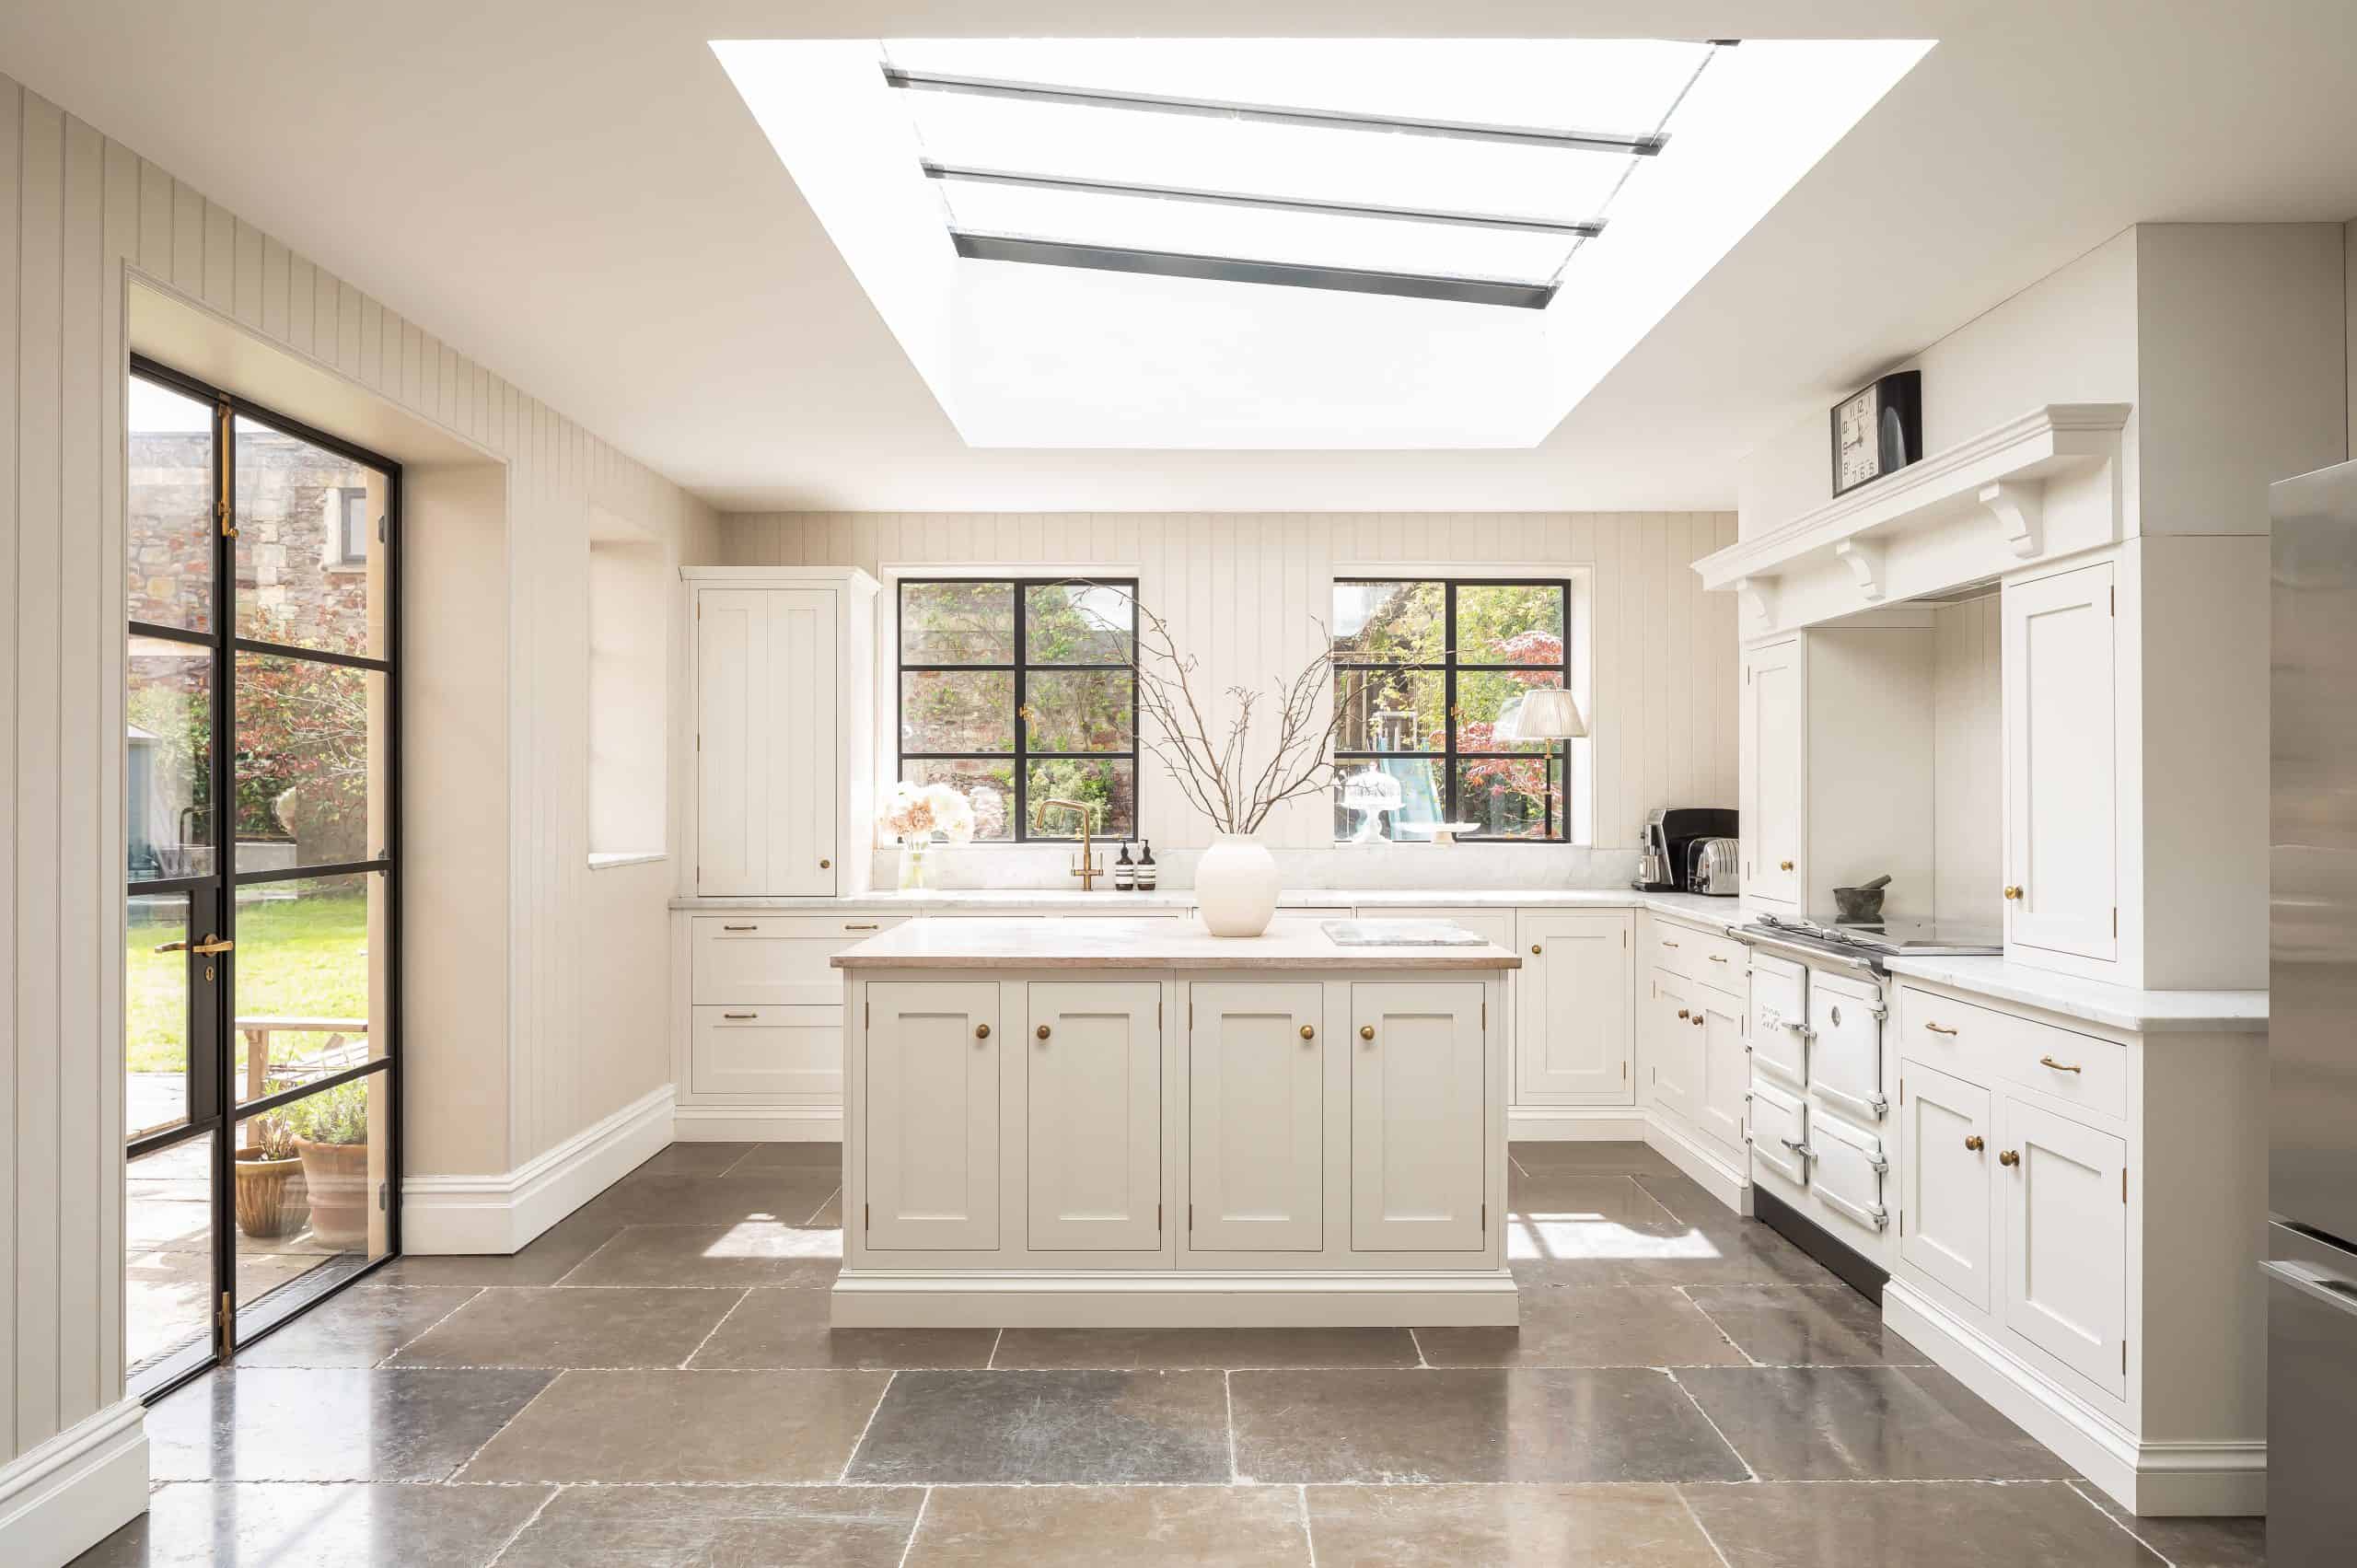 John Lewis of Hungerford bespoke luxury Shaker kitchen in white with stone flooring